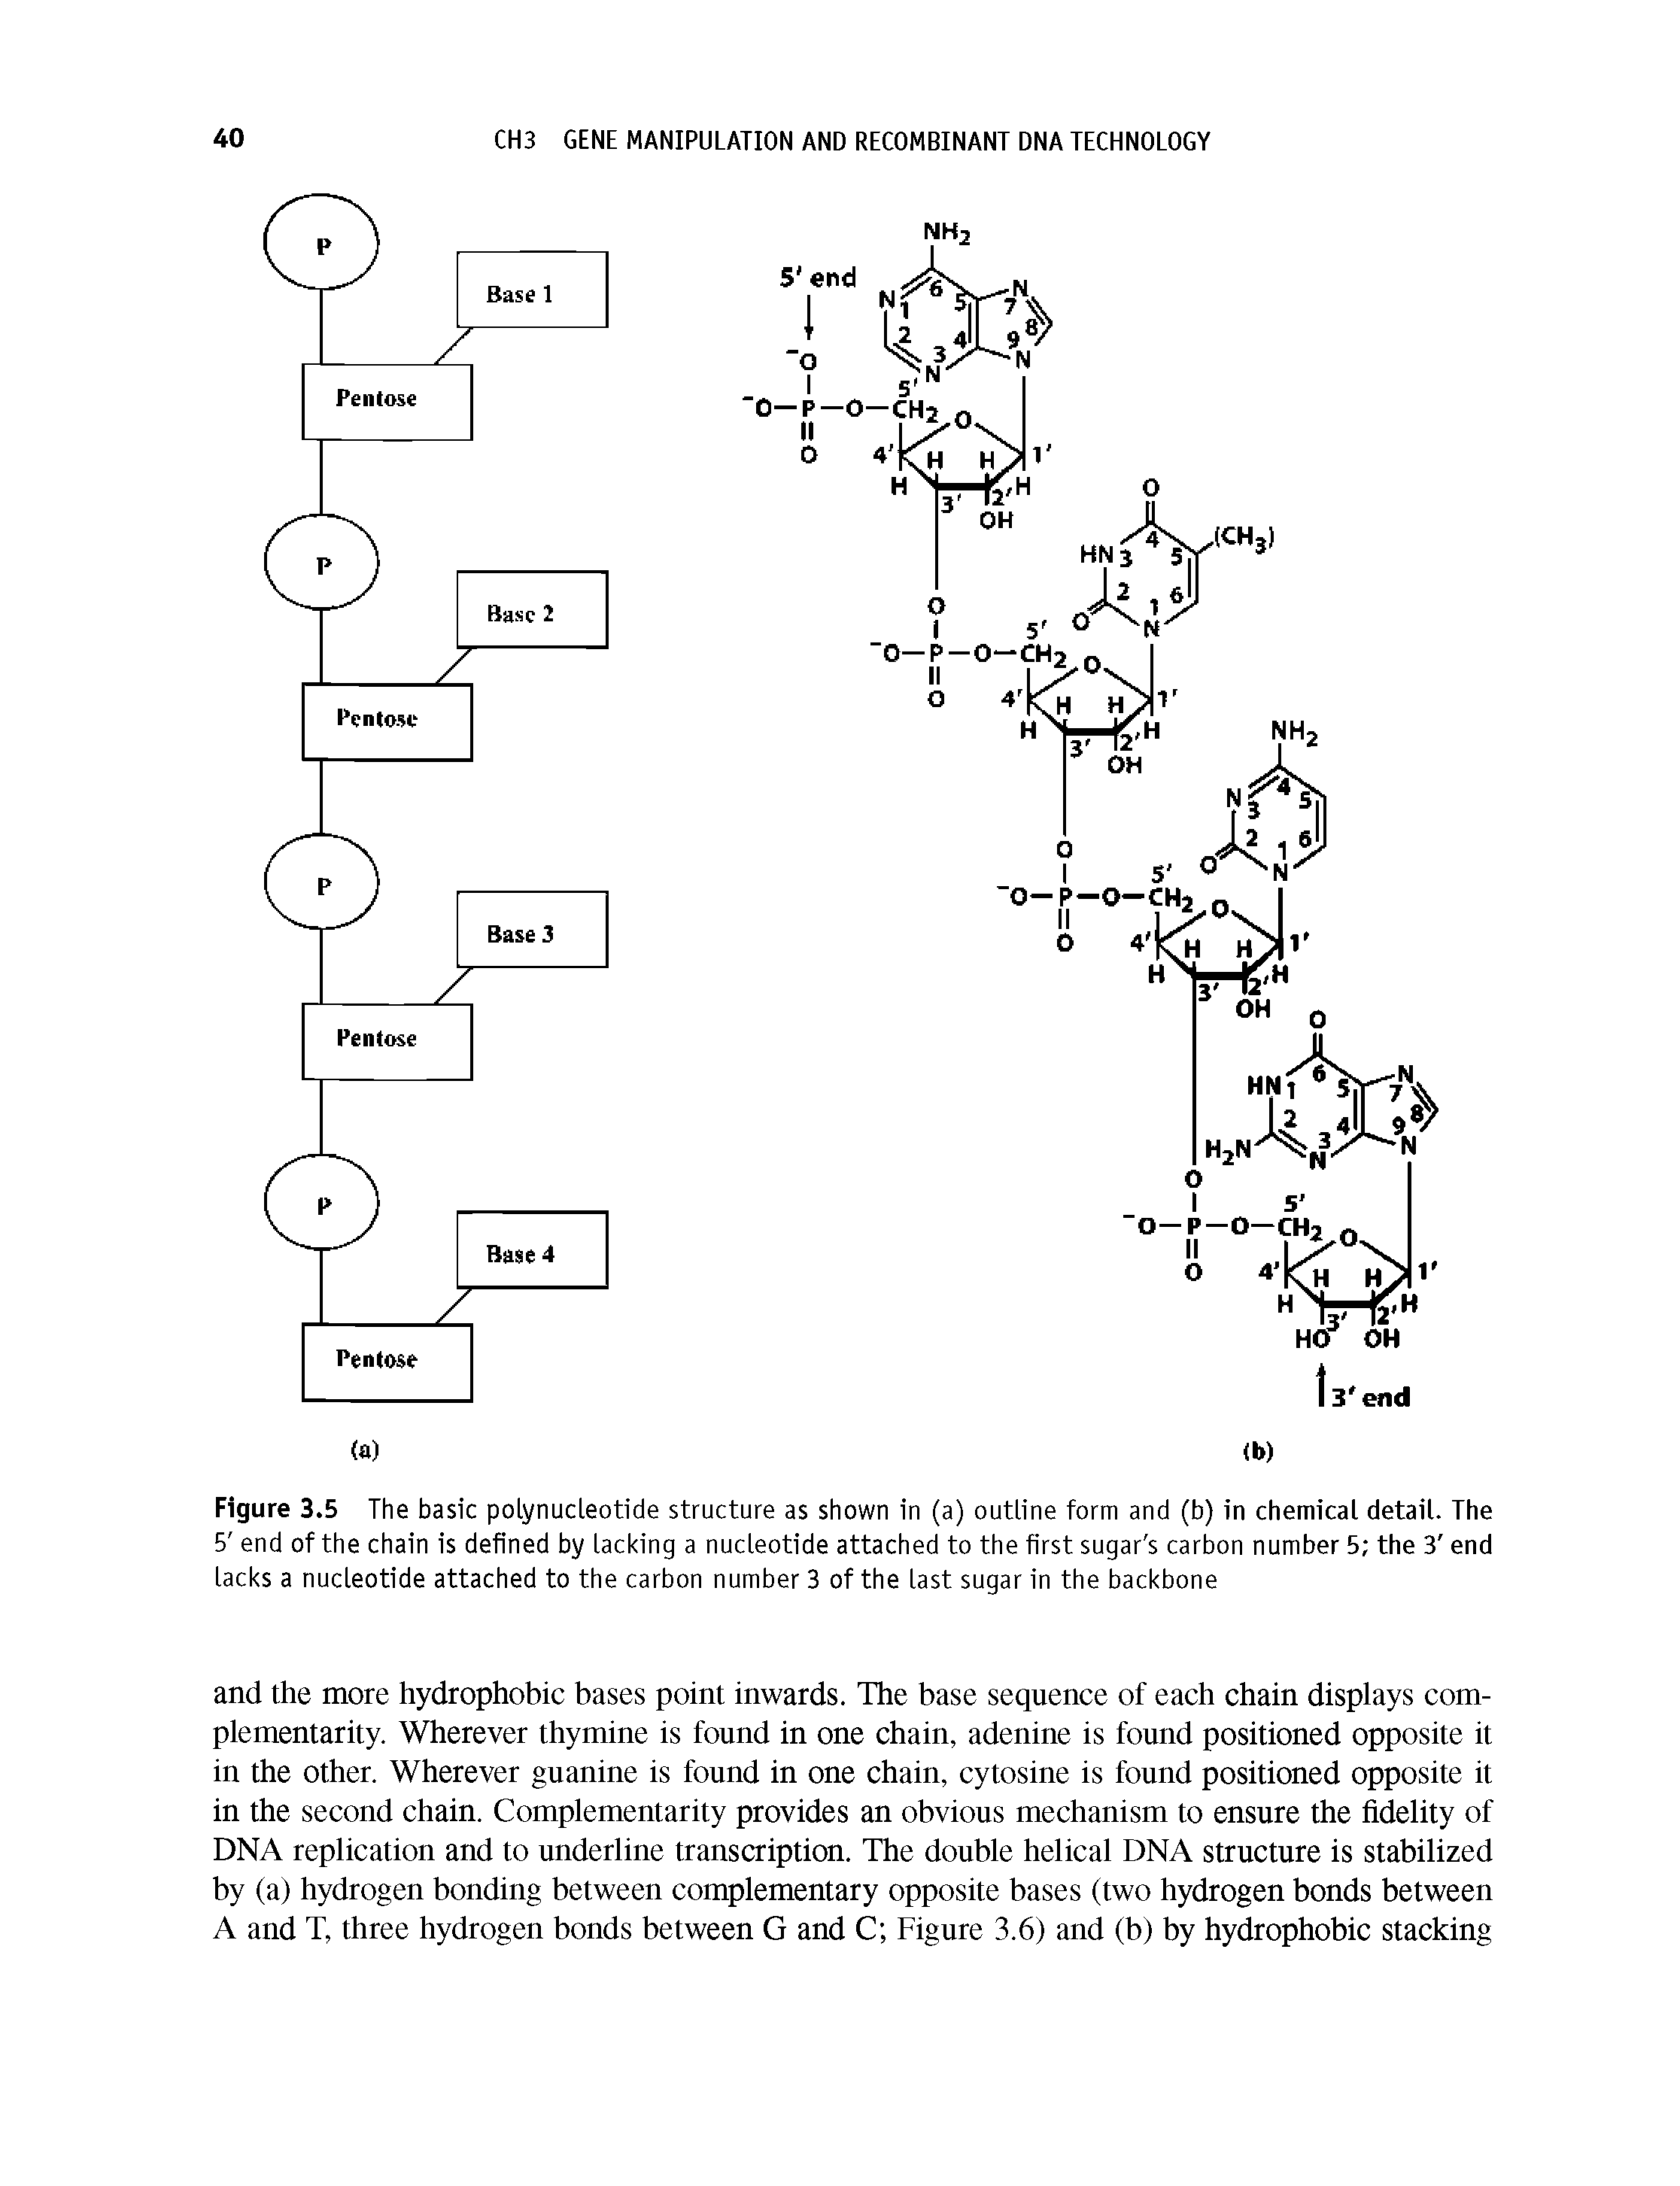 Figure 3.5 The basic polynucleotide structure as shown in (a) outline form and (b) in chemical detail. The 5 end of the chain is defined by lacking a nucleotide attached to the first sugar s carbon number 5 the 3 end lacks a nucleotide attached to the carbon number 3 of the last sugar in the backbone...